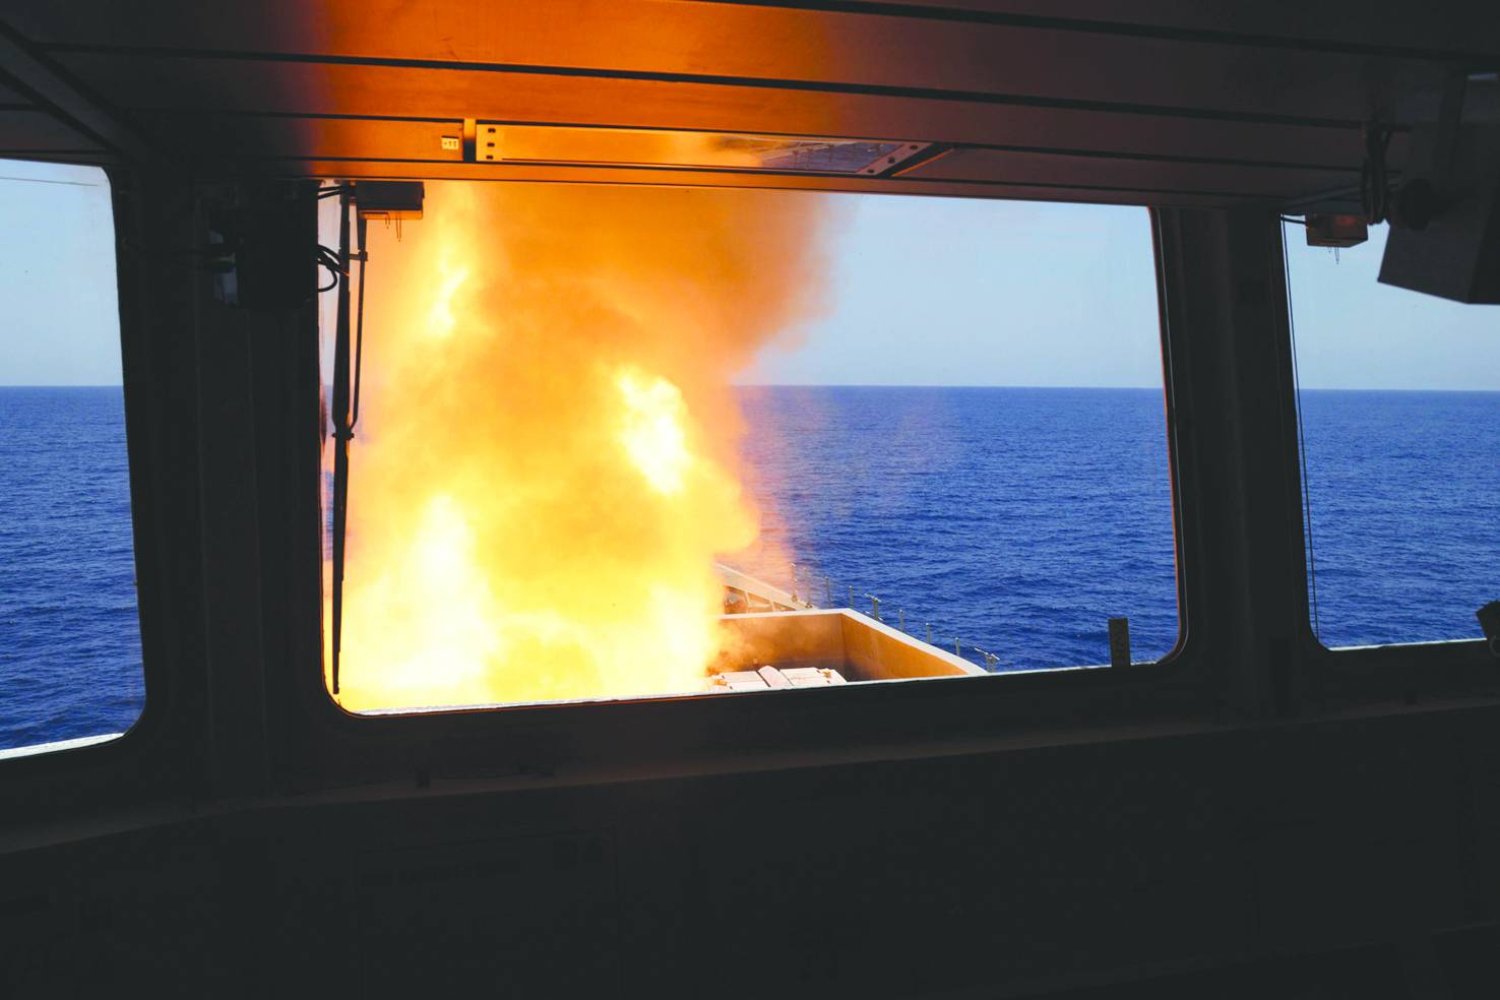 In this photo provided by the Ministry of Defense (MoD), a Sea Viper missile is  launched from HMS Diamond to shoot down a missile fired by the Iranian-backed Houthis from Yemen, Wednesday, April 24, 2024. (LPhot Chris Sellars/MoD Crown copyright via AP)